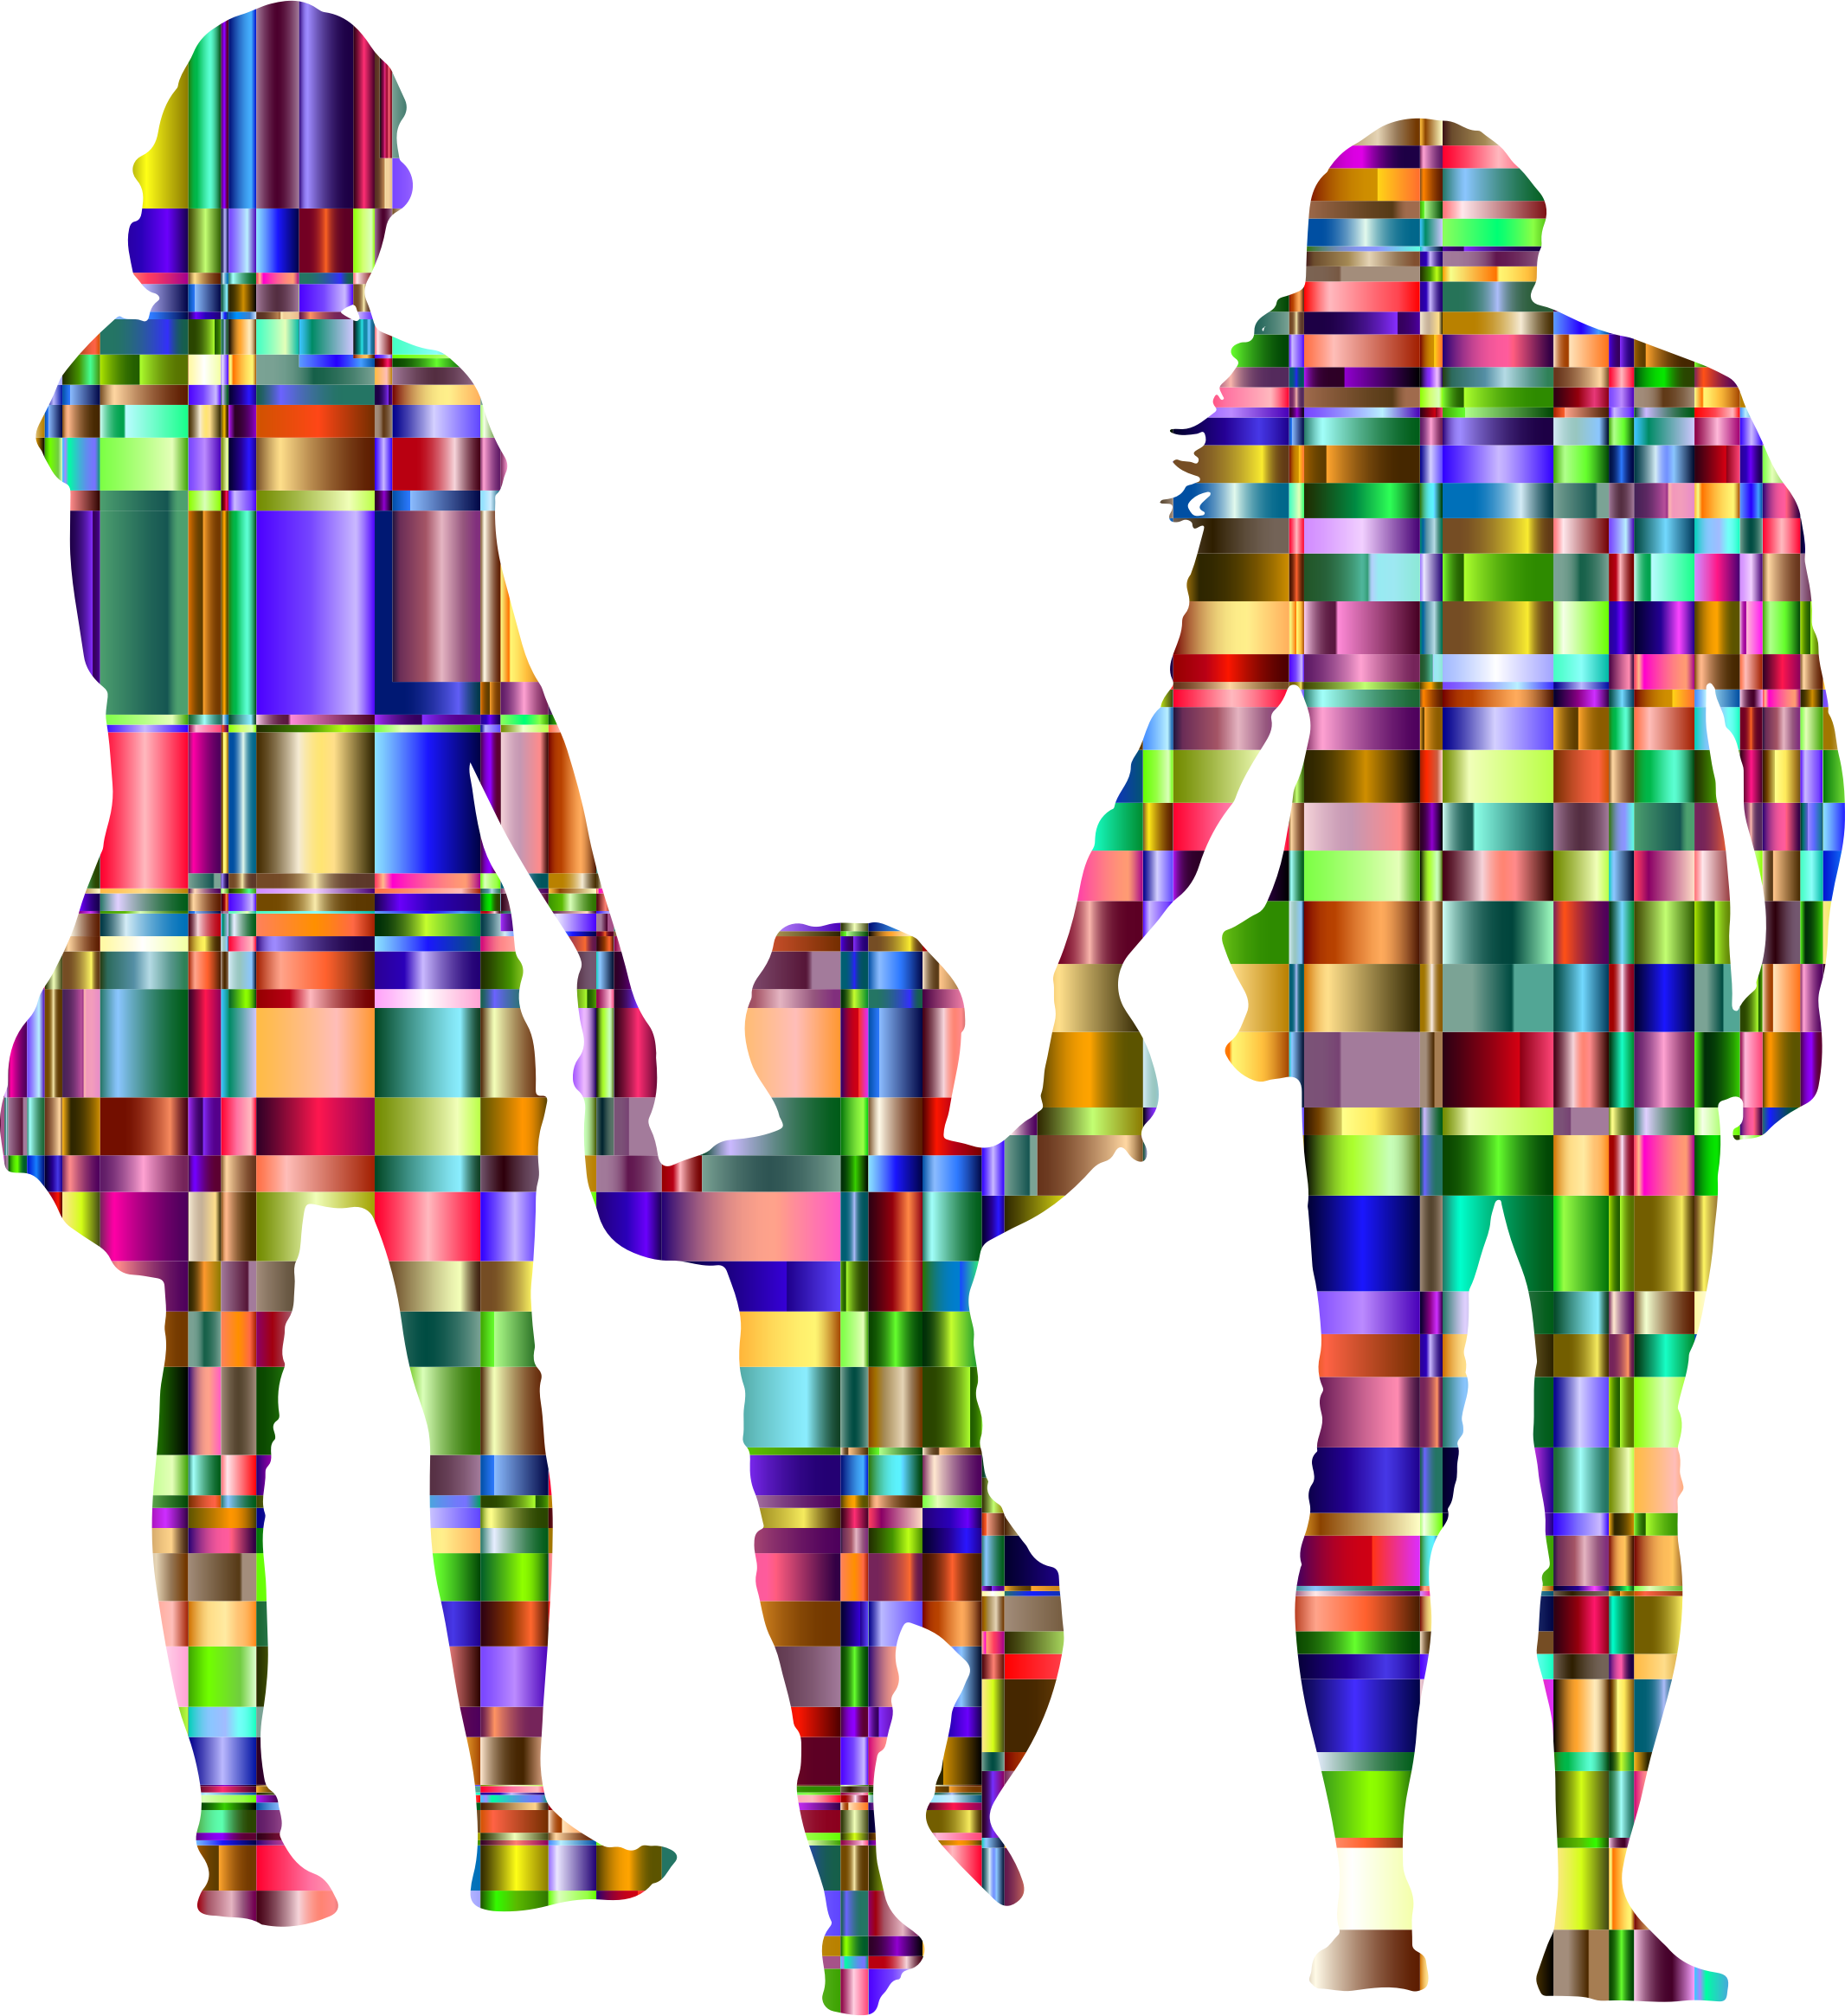 Checkered Family With A Child In The Middle Silhouette - Illustration (2132x2330)